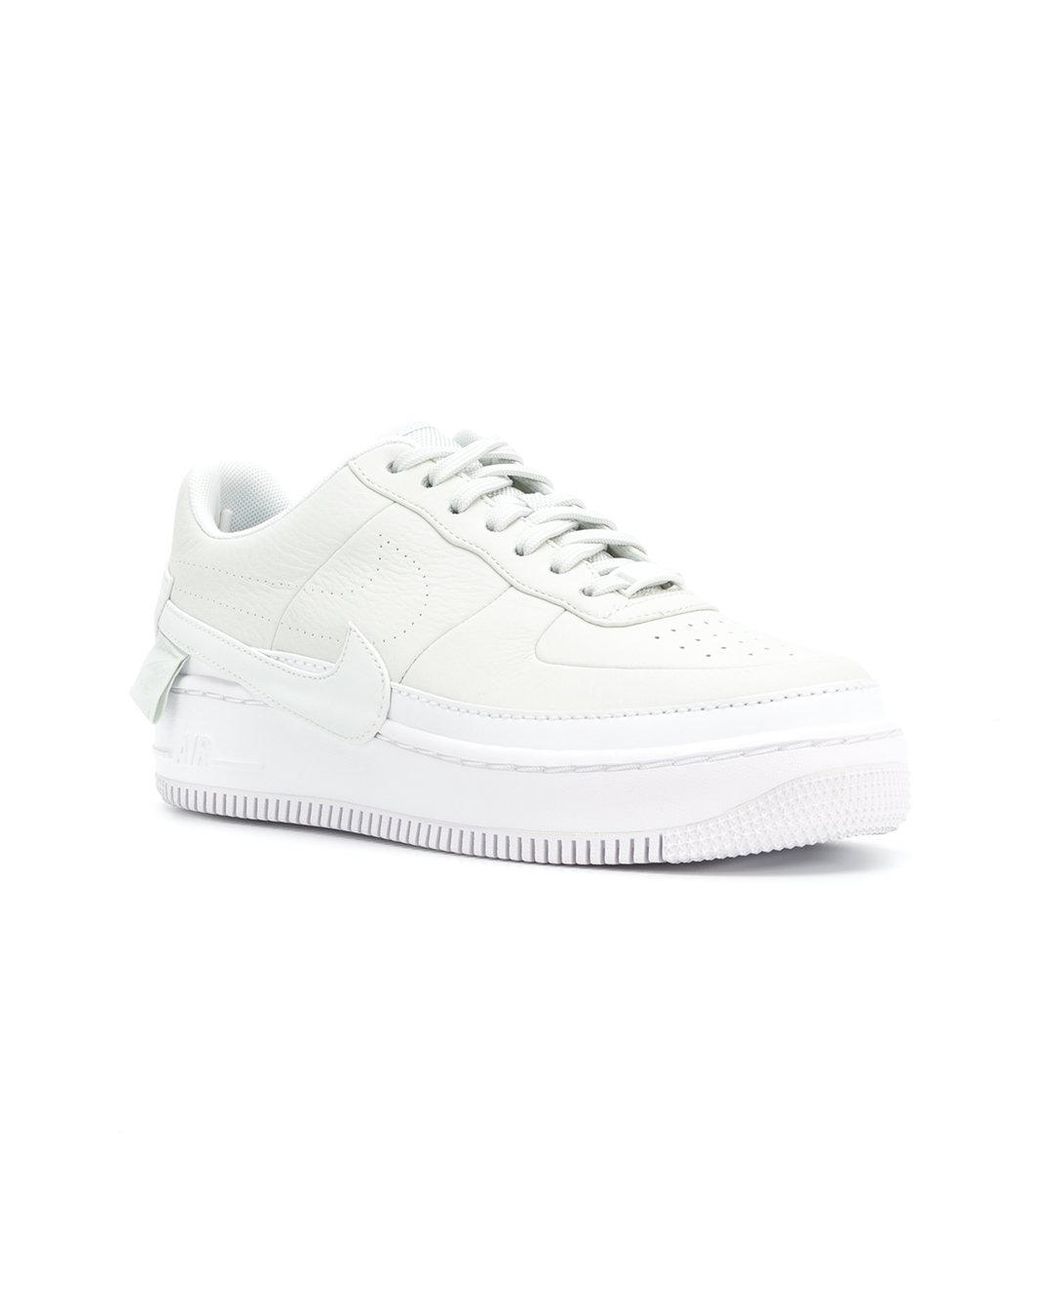 Nike Leather Air Force 1 Jester Xx Reimagined Sneakers in White | Lyst  Australia